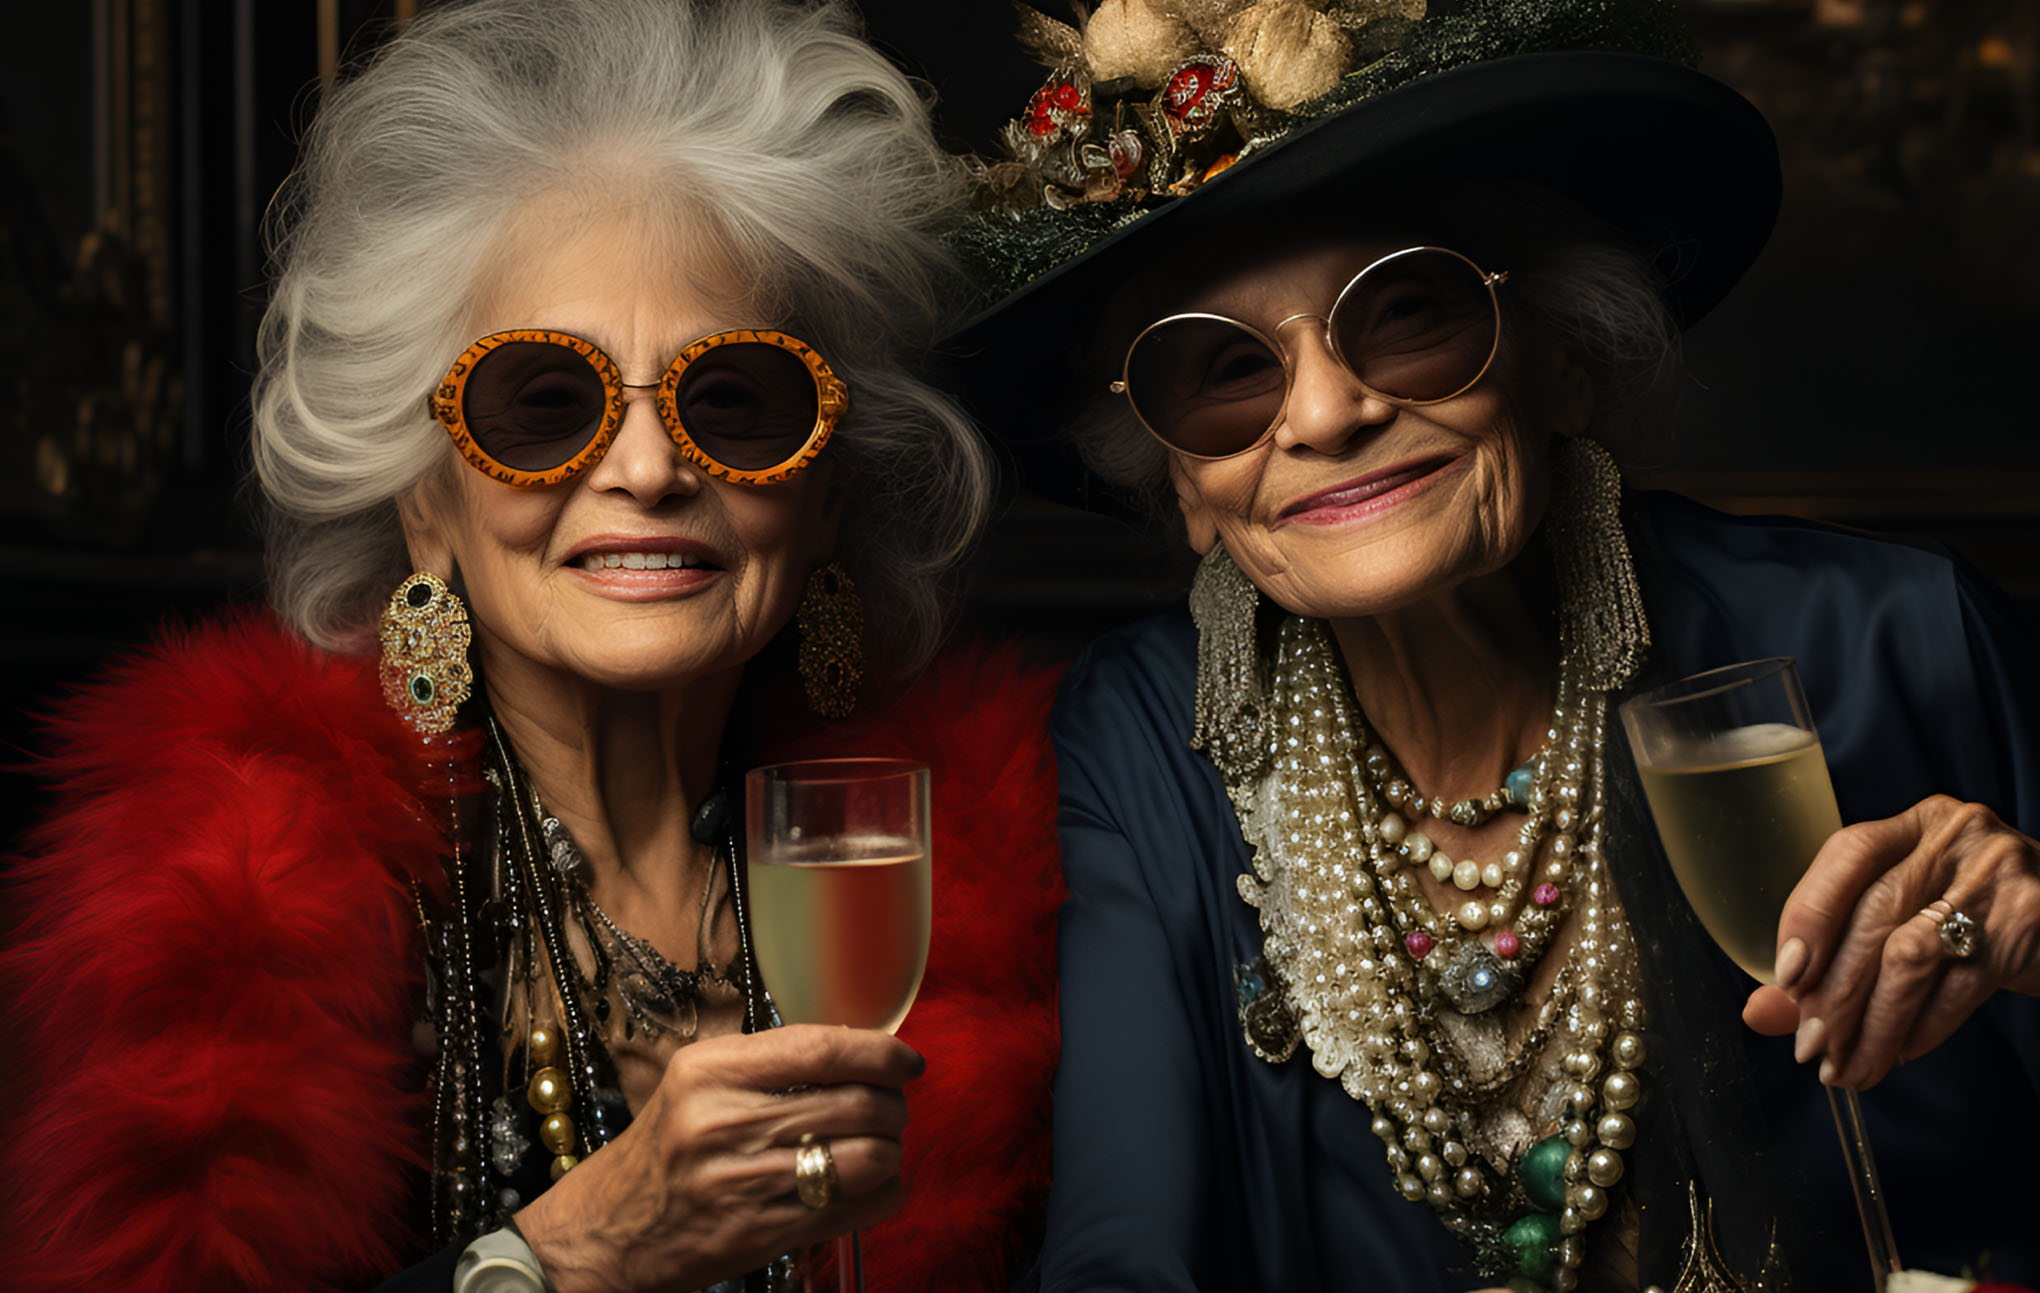 Two elderly women with stylish glasses and lavish accessories, including pearls and feather boas, smiling joyfully while holding champagne glasses.